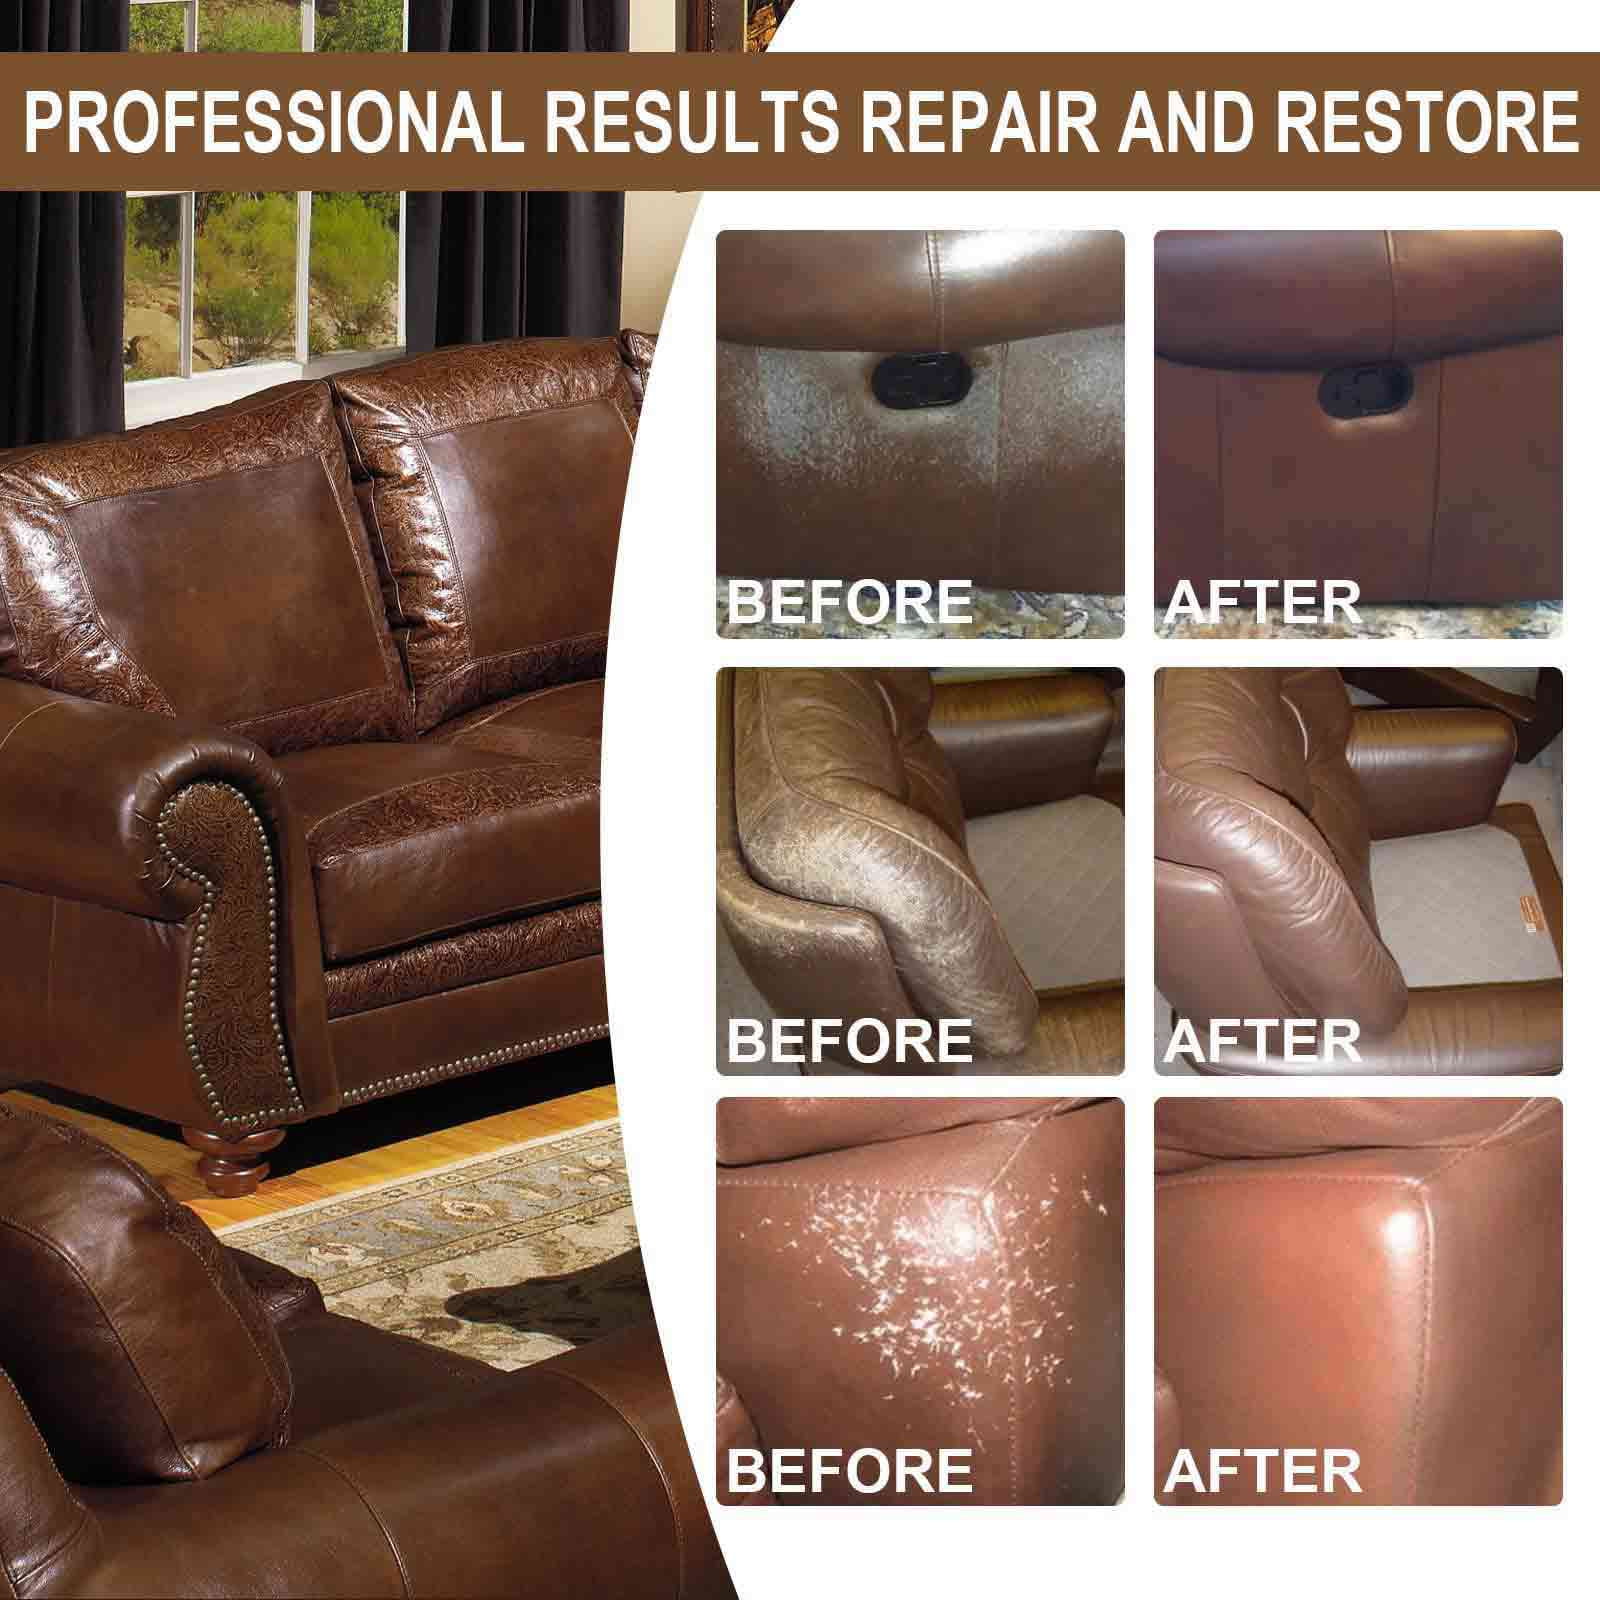 How To Restore Leather: Simple Leather Restoration Guide - Von Baer